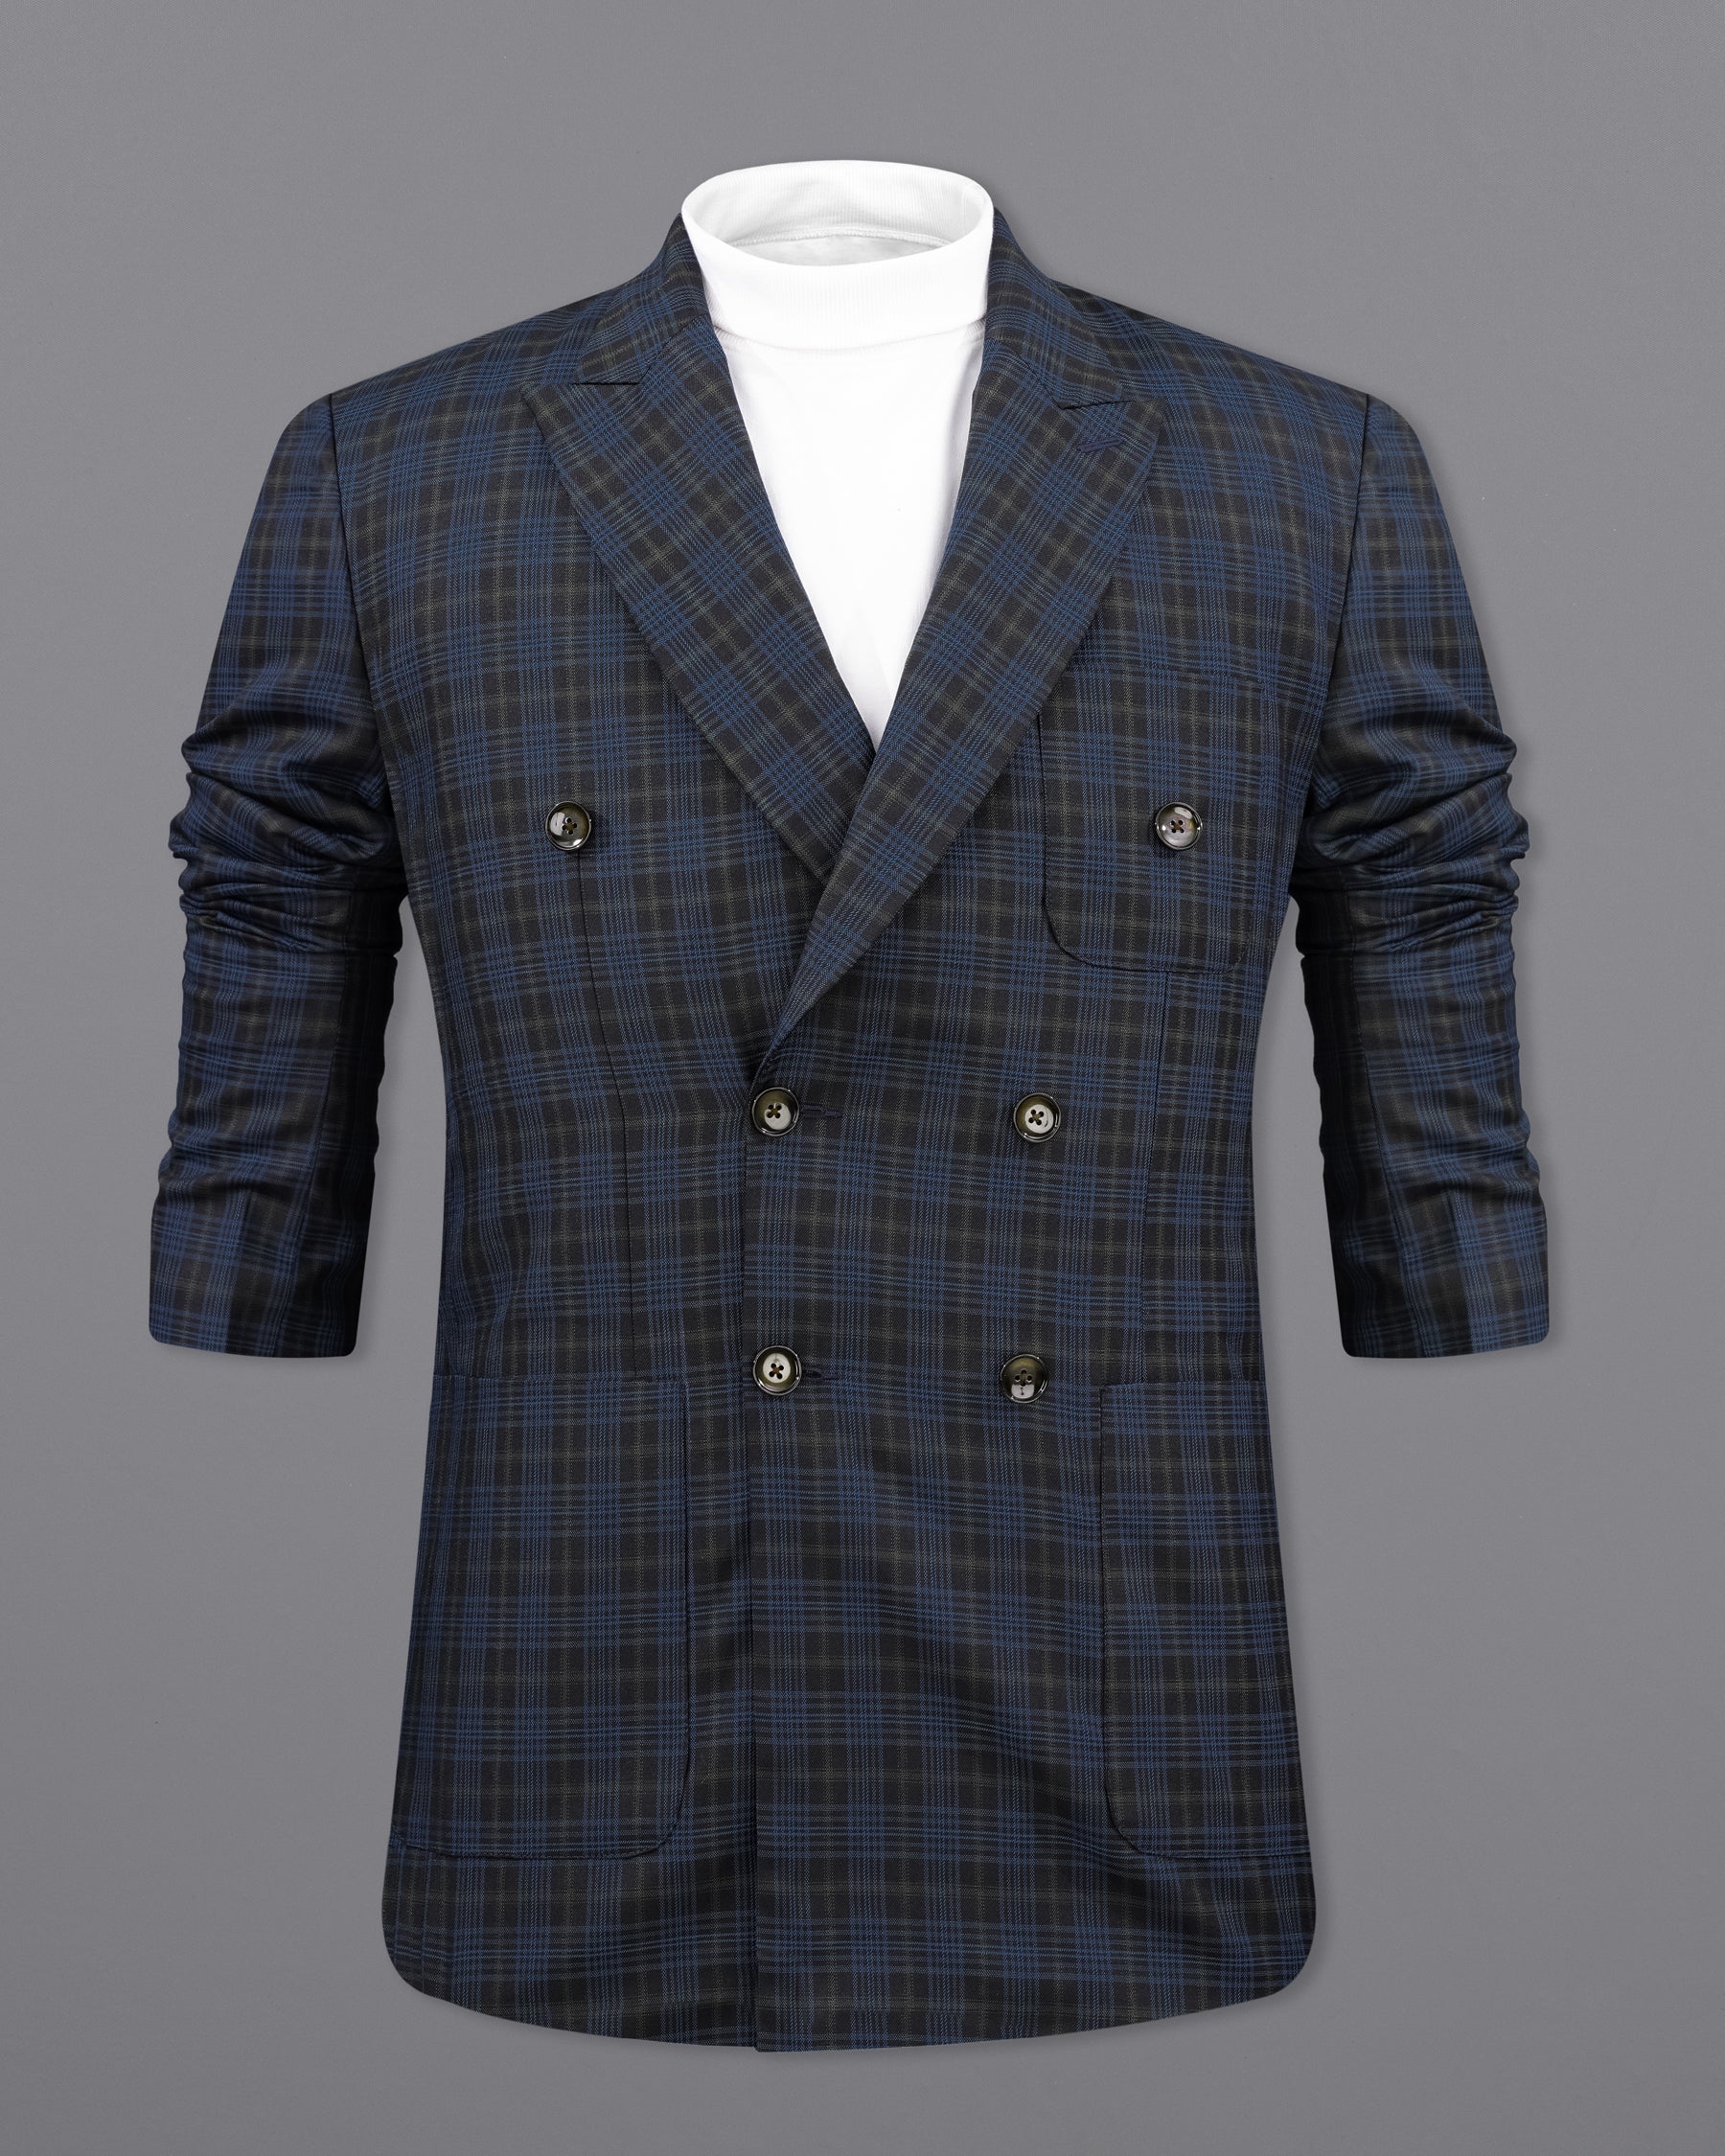 Fiord Navy Blue with Black Russian Plaid Double Breasted Sports Blazer